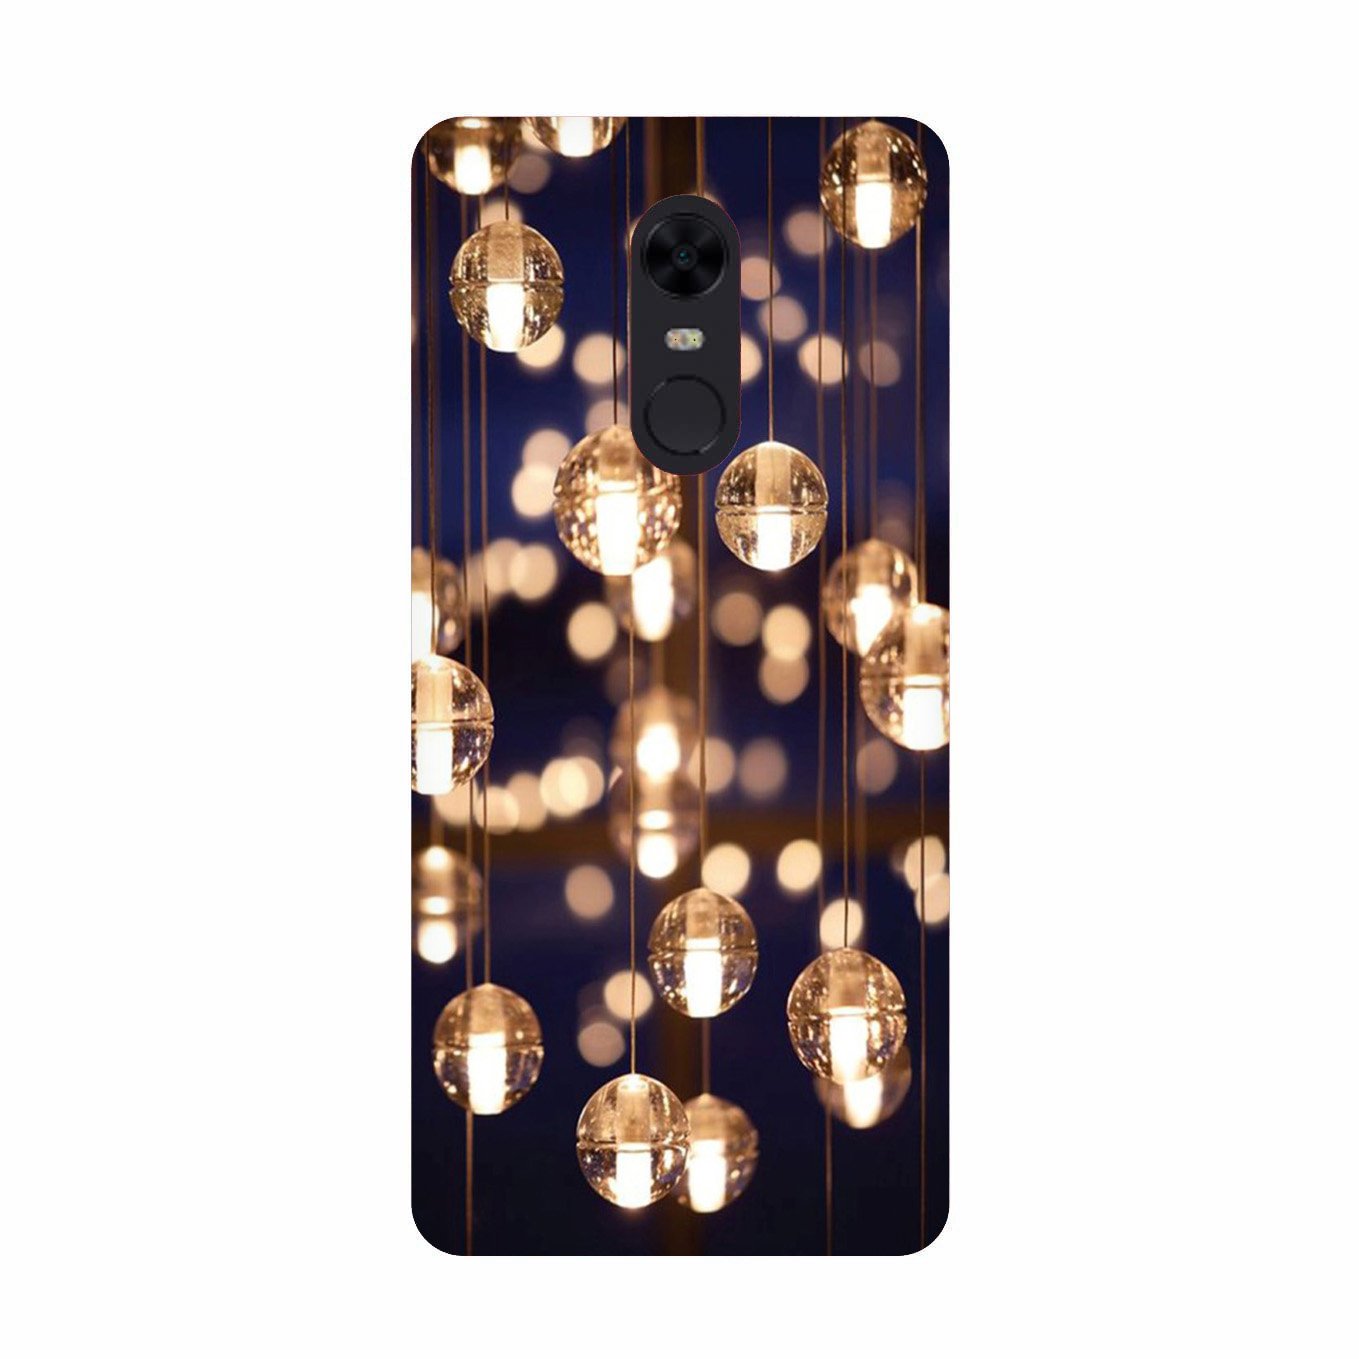 Party Bulb2 Case for Redmi Note 5